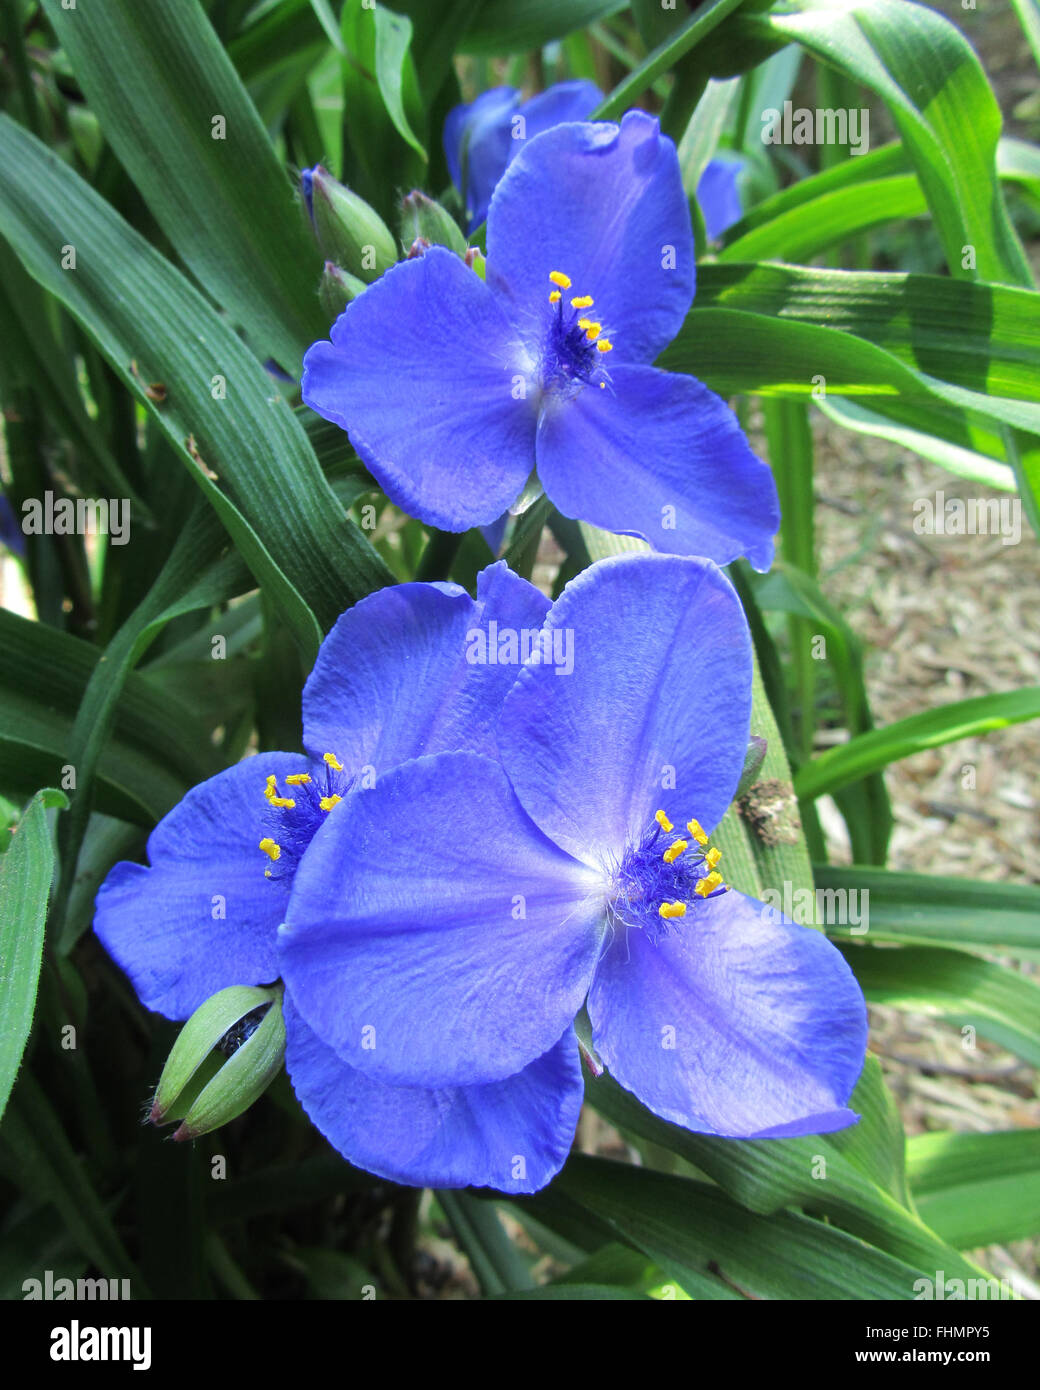 The beautiful blue summer flowers of Tradescantia virgniana (Spiderwort), a perennial plant which is native to the U.S.A. Stock Photo